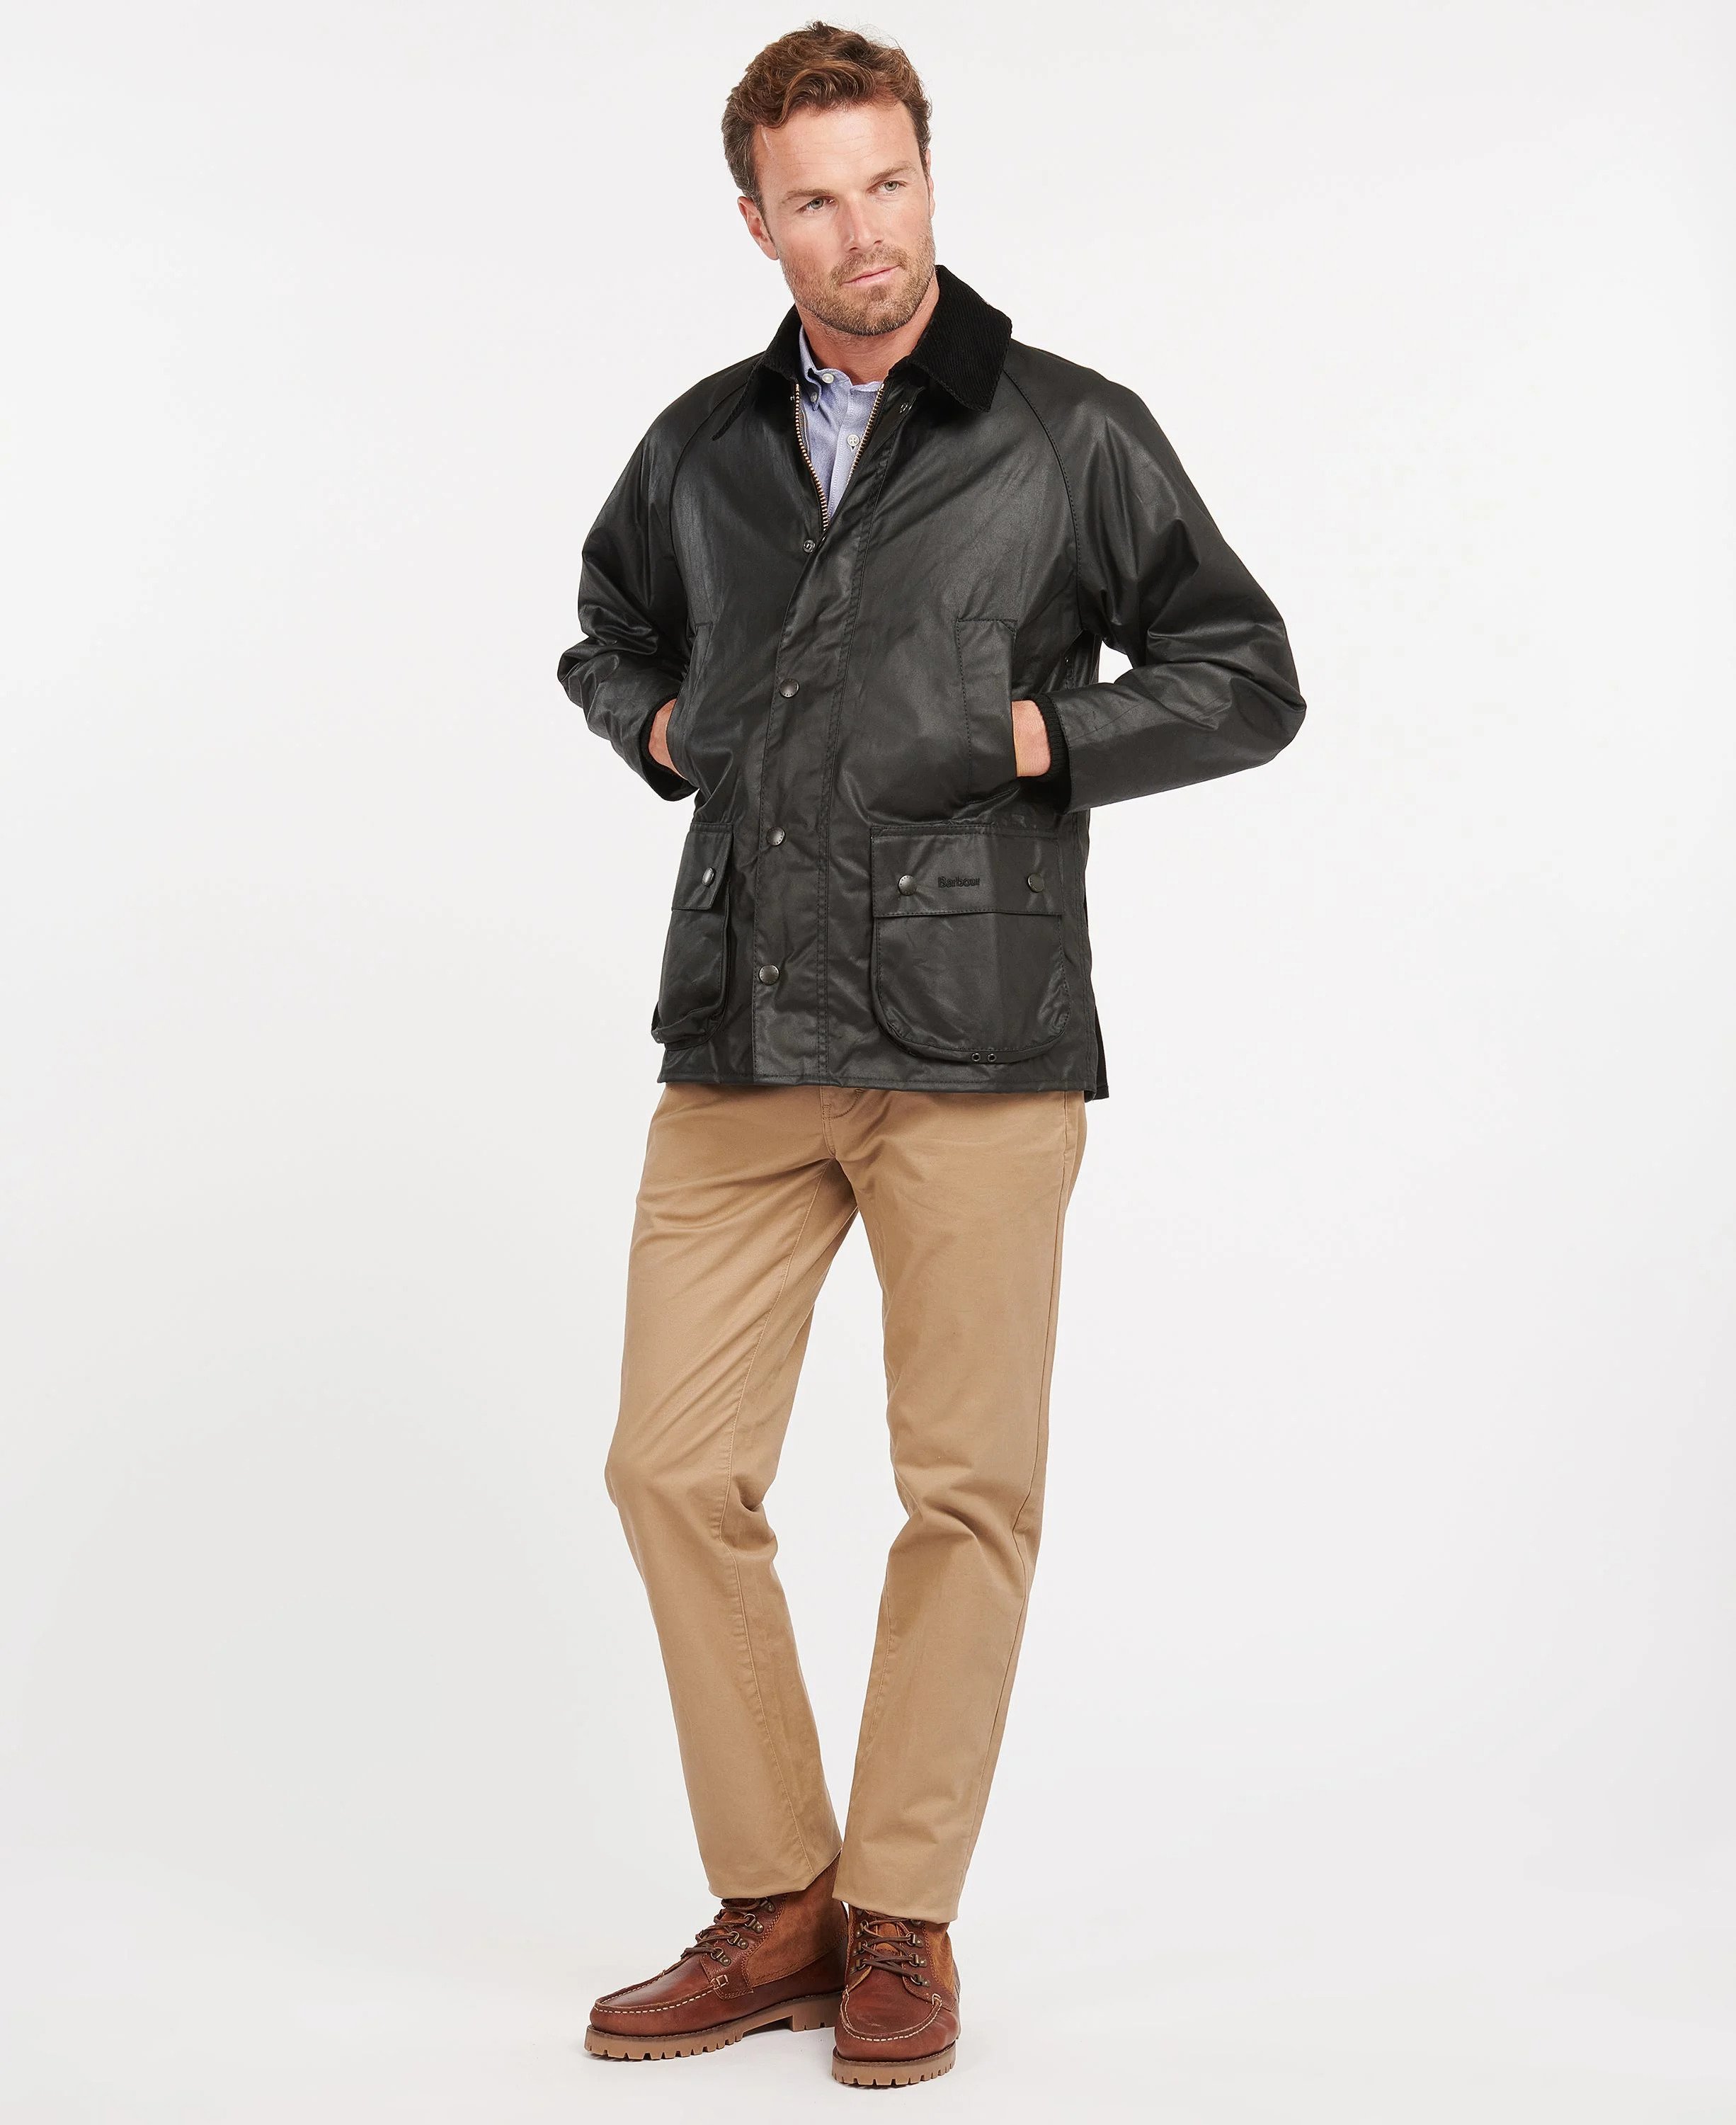 A Look At the Iconic Bedale Barbour Jacket | Barbour | Barbour